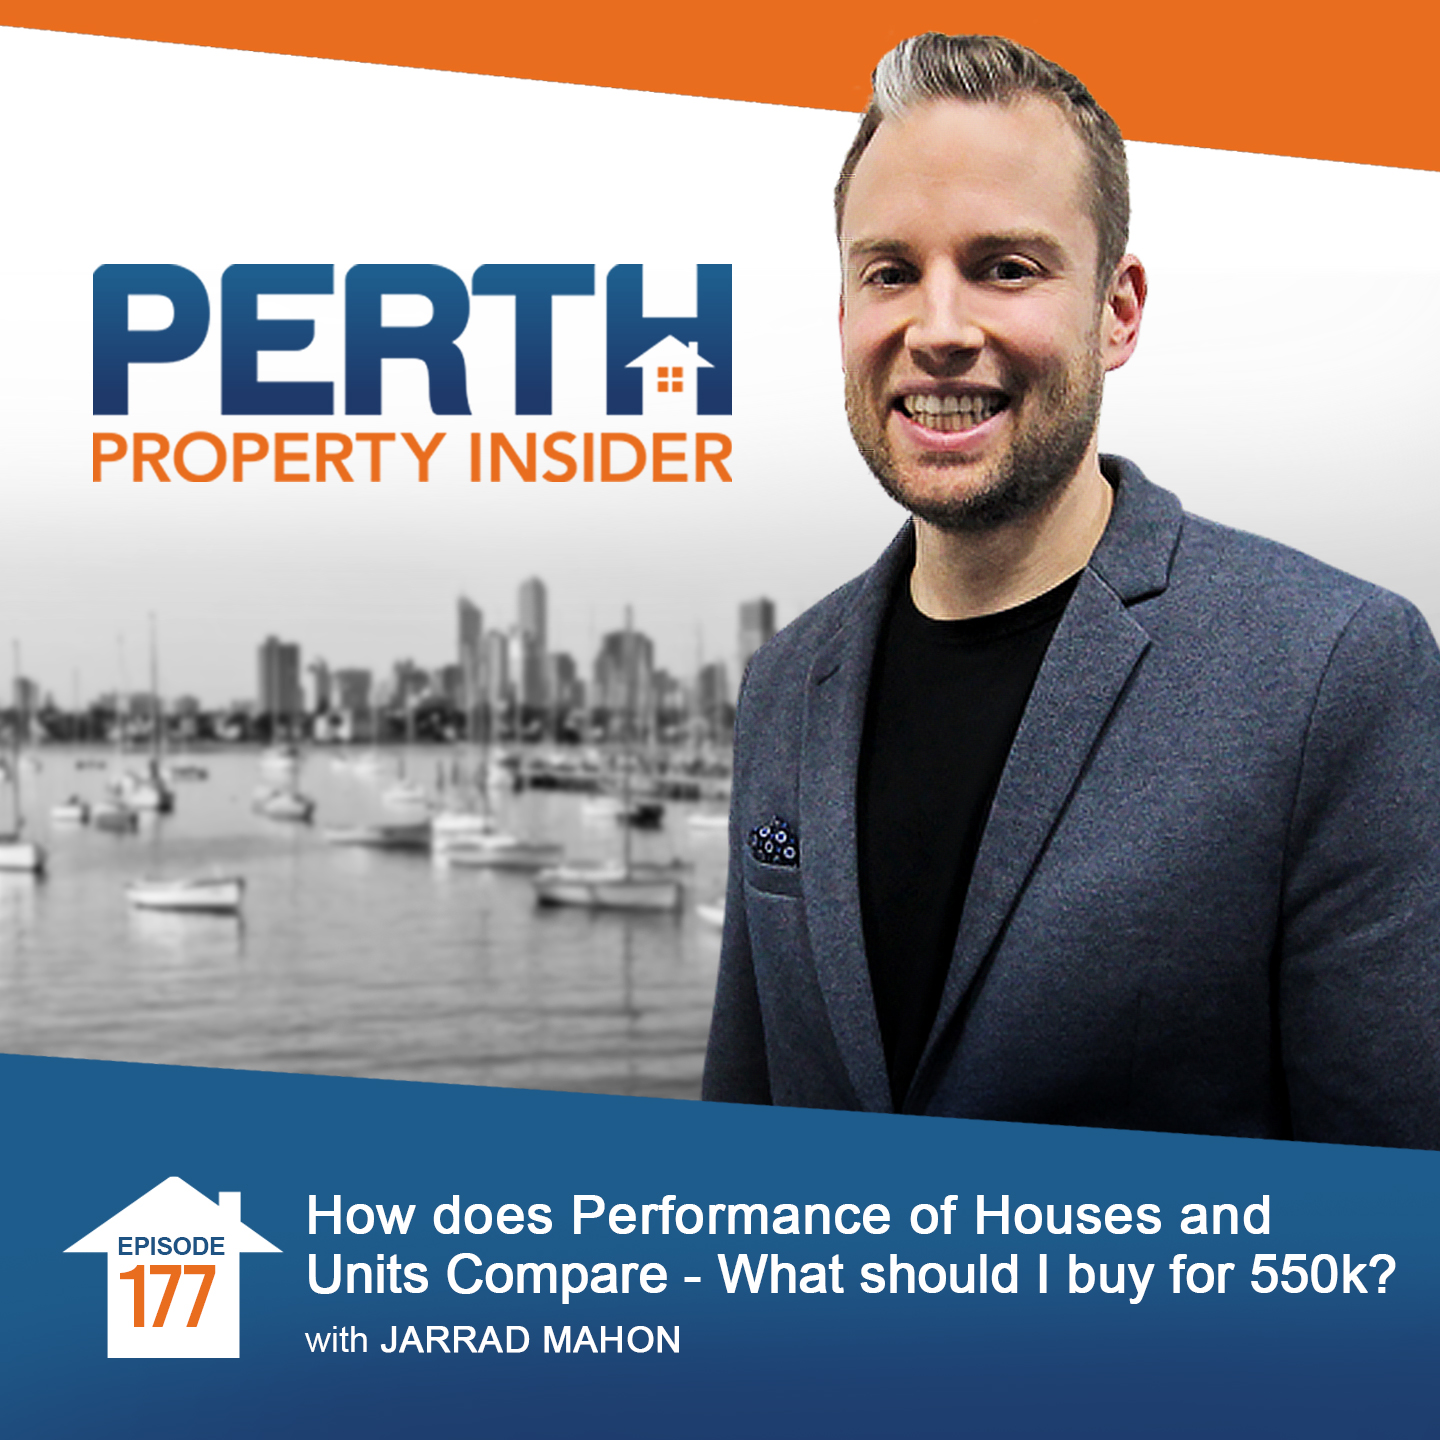 How does Performance of Houses & Units Compare - What should I buy for 550k?